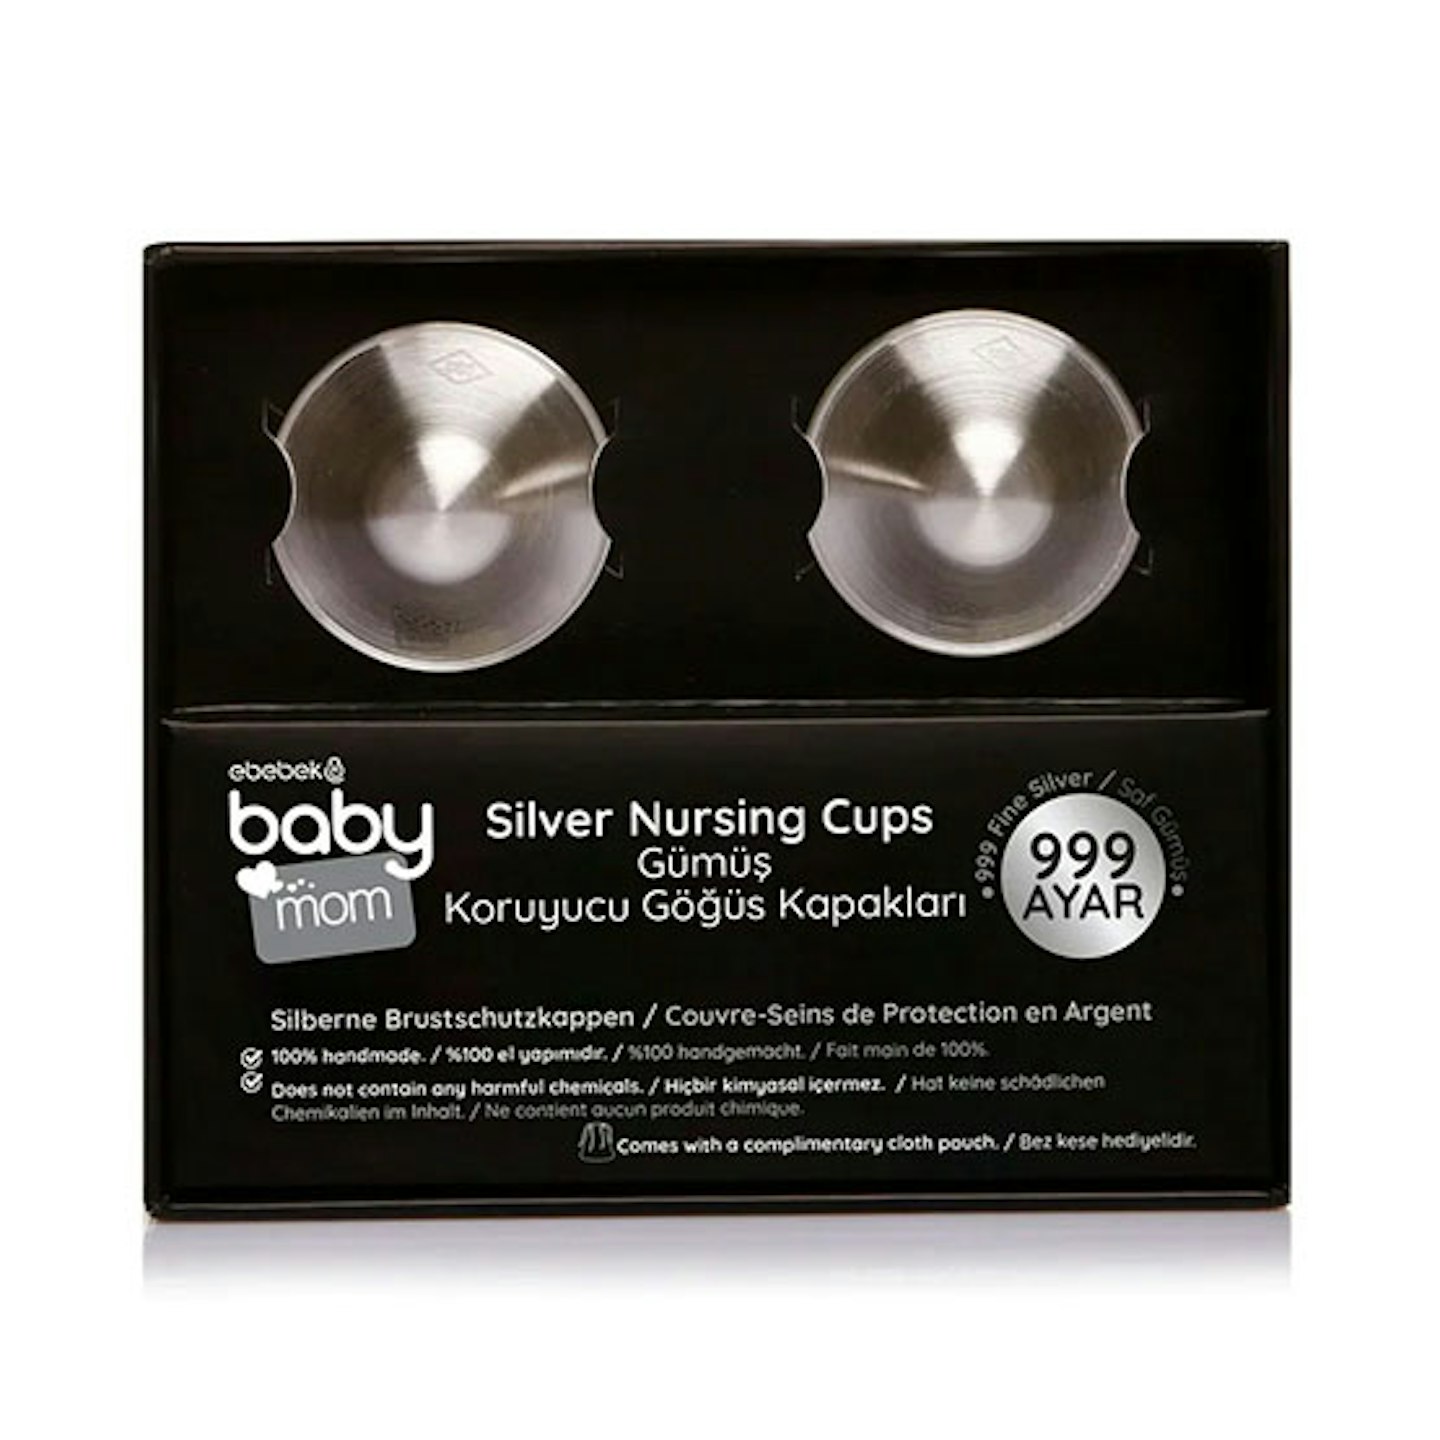 Everything you need to know about silver nursing cups for